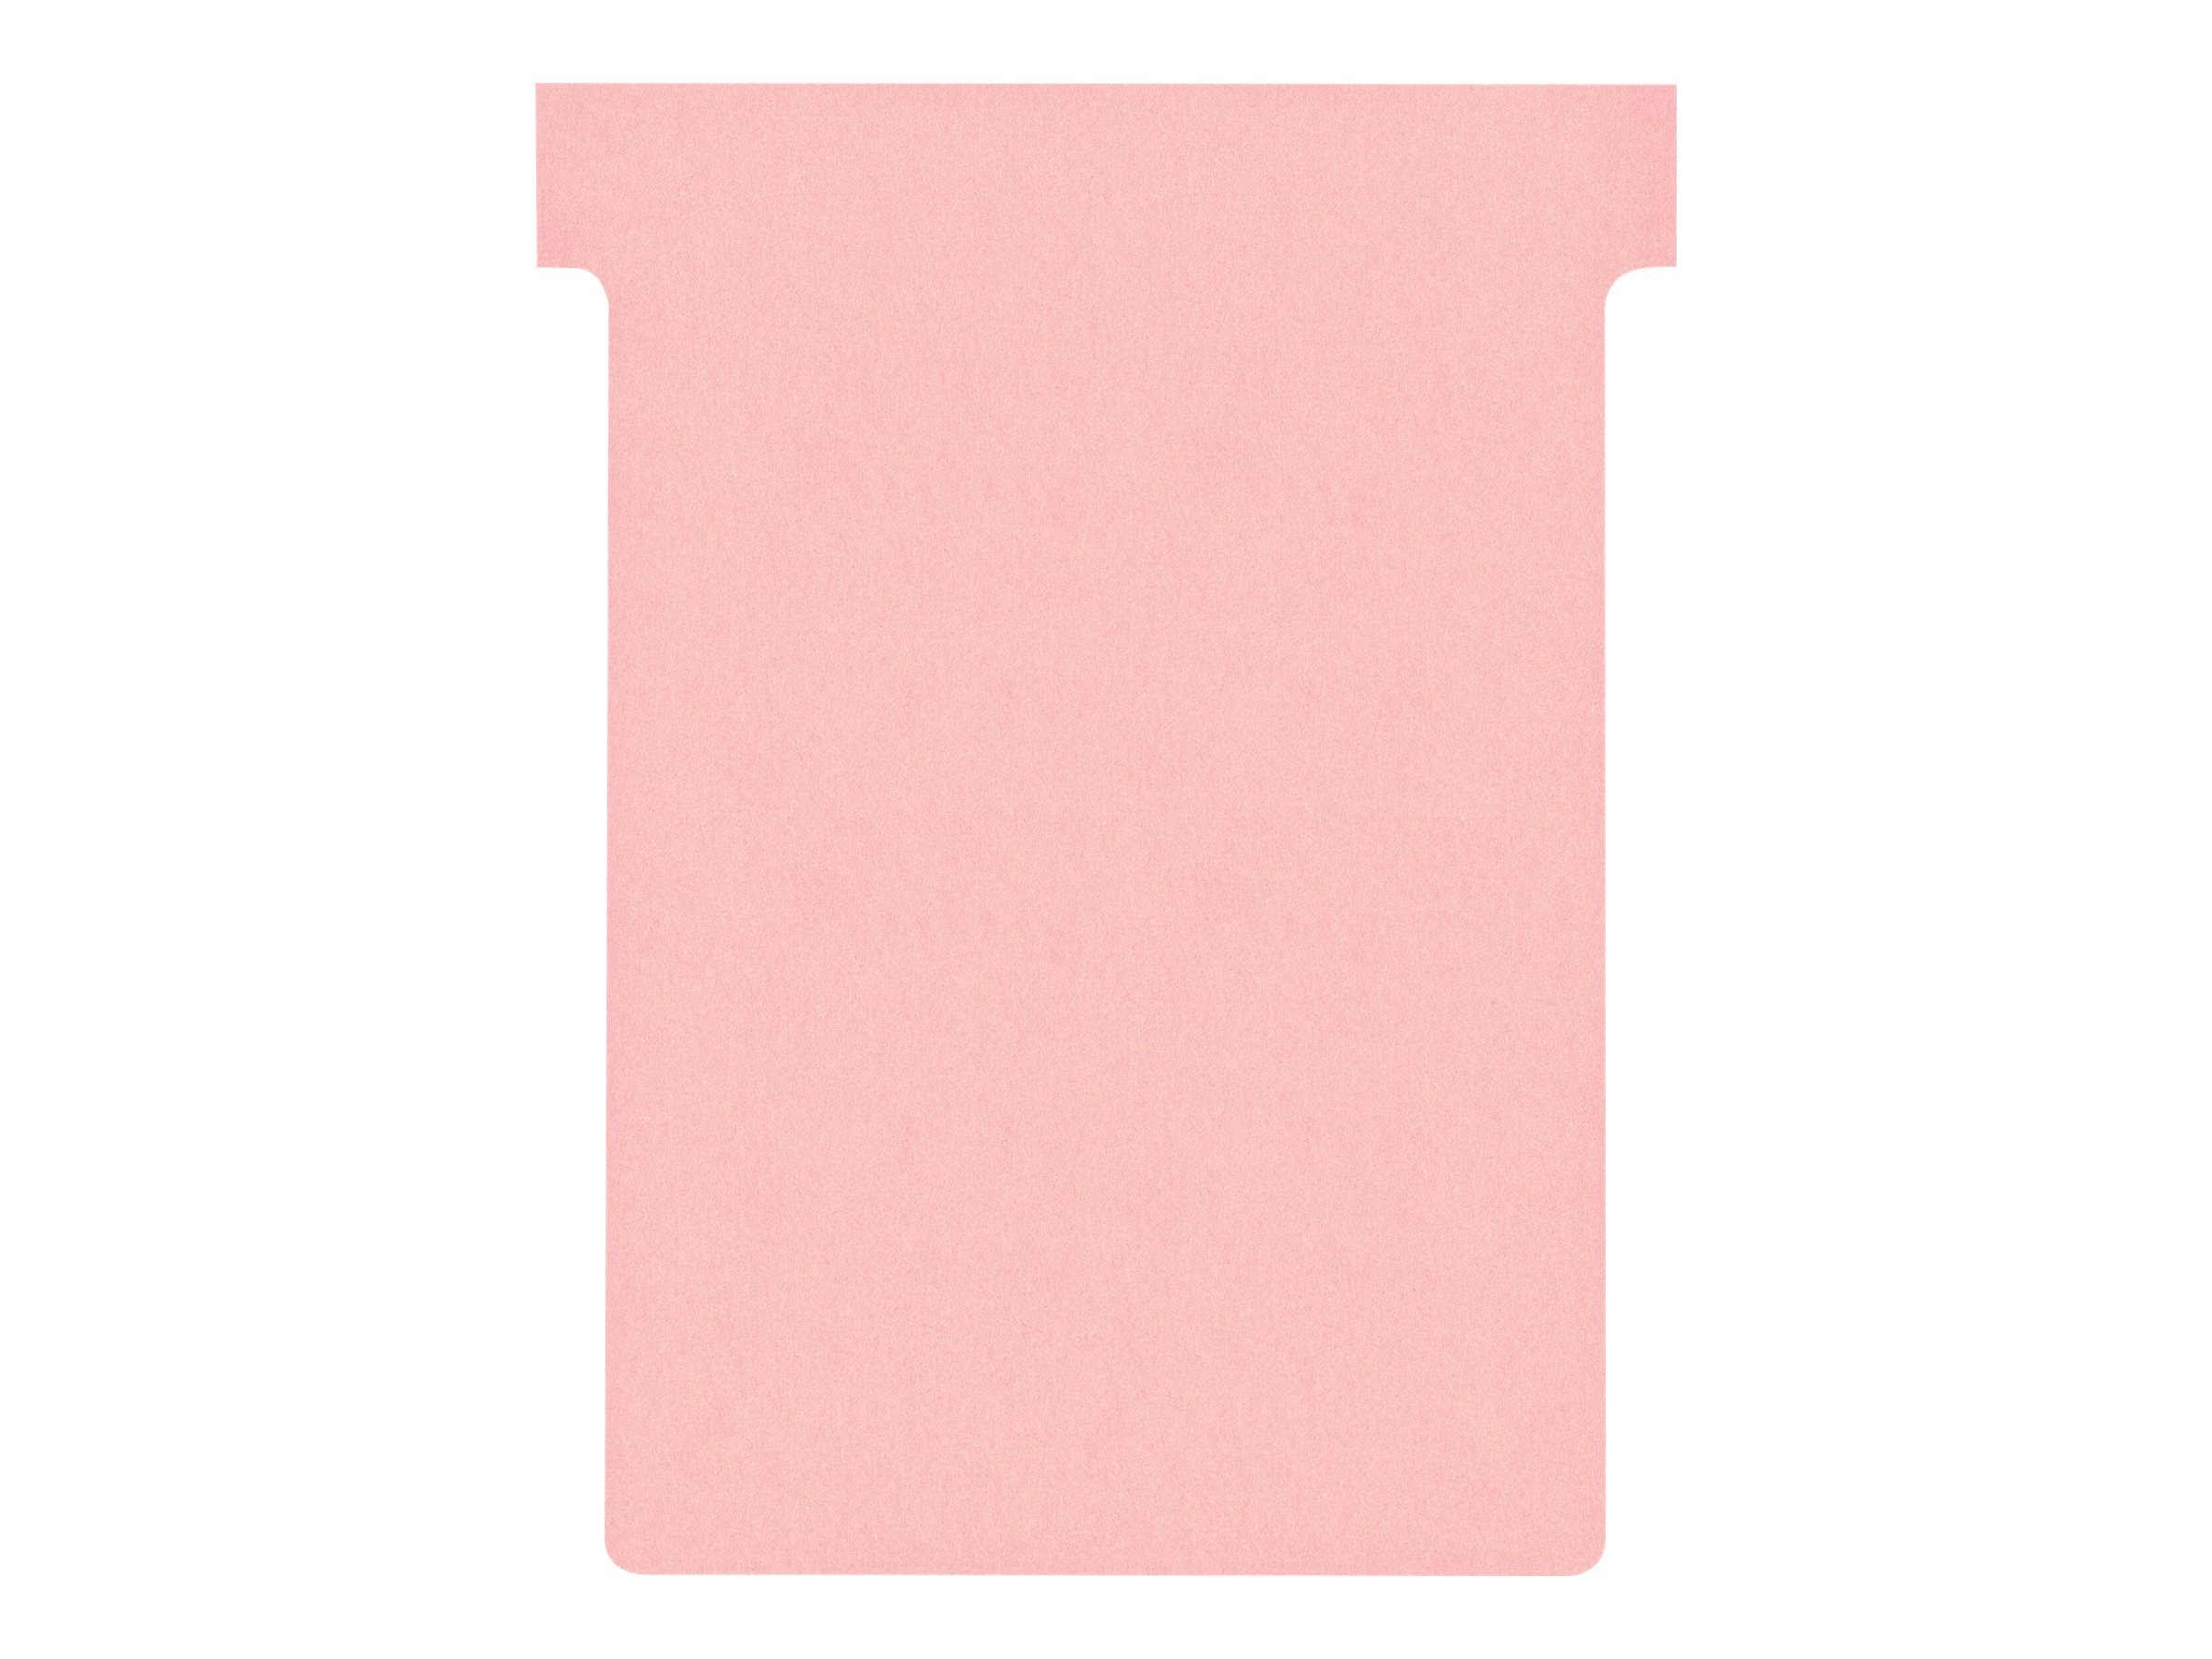 Fiches T pour planning - Taille 1,5 - Rose - NOBO